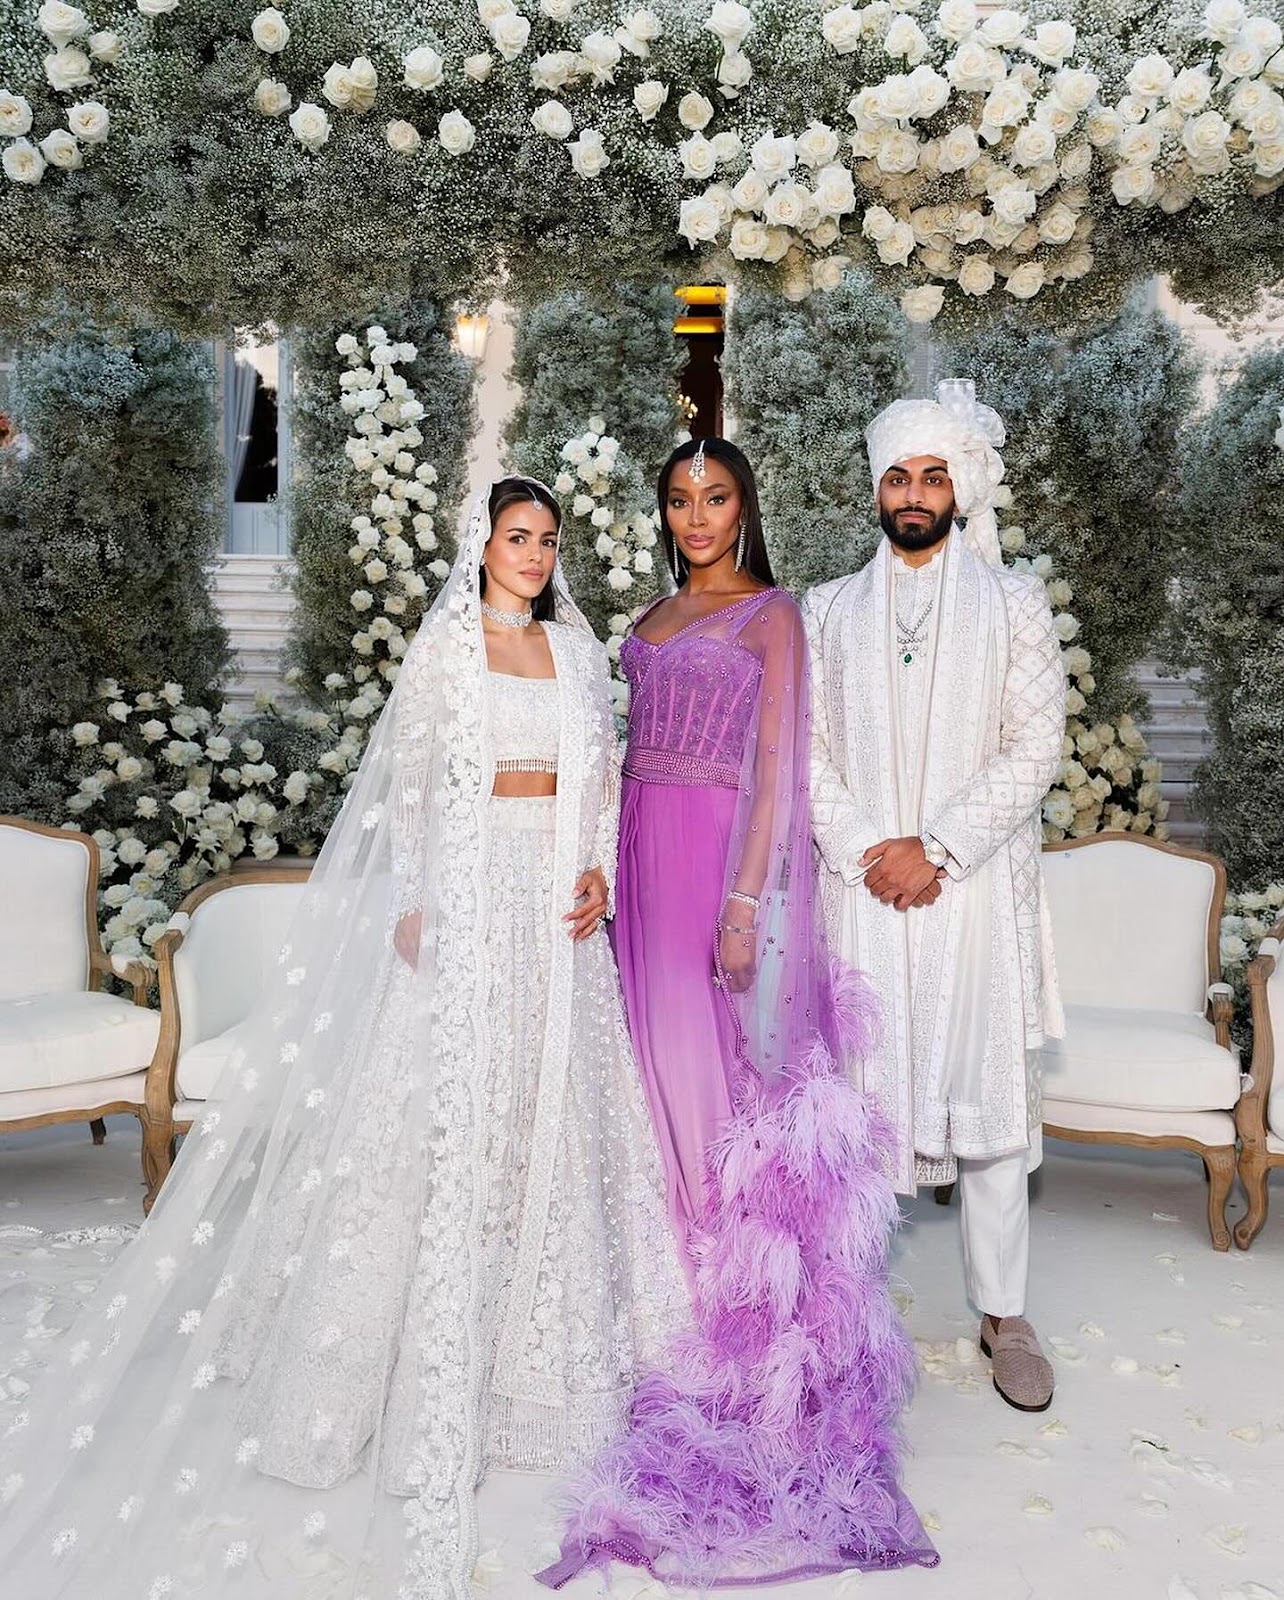 Naomi Campbell Stuns at Umar Kamani’s Star-Studded Wedding in the French Riviera